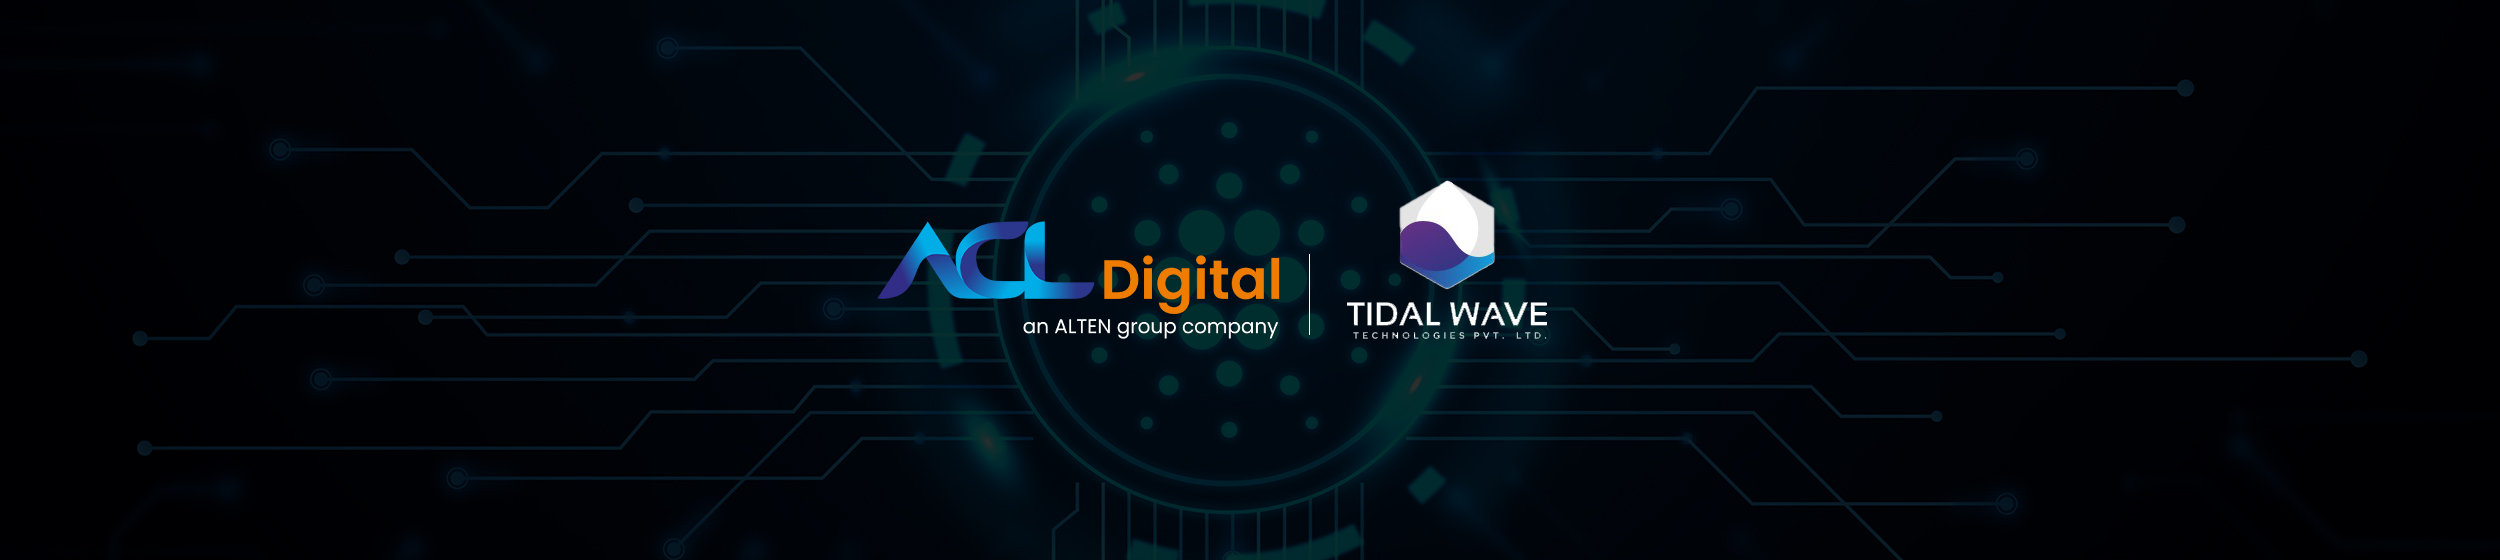 Banner-ACL Digital and Tidal Wave Announce Strategic Private 5G Alliance to Drive Industry 4.0 Transformation